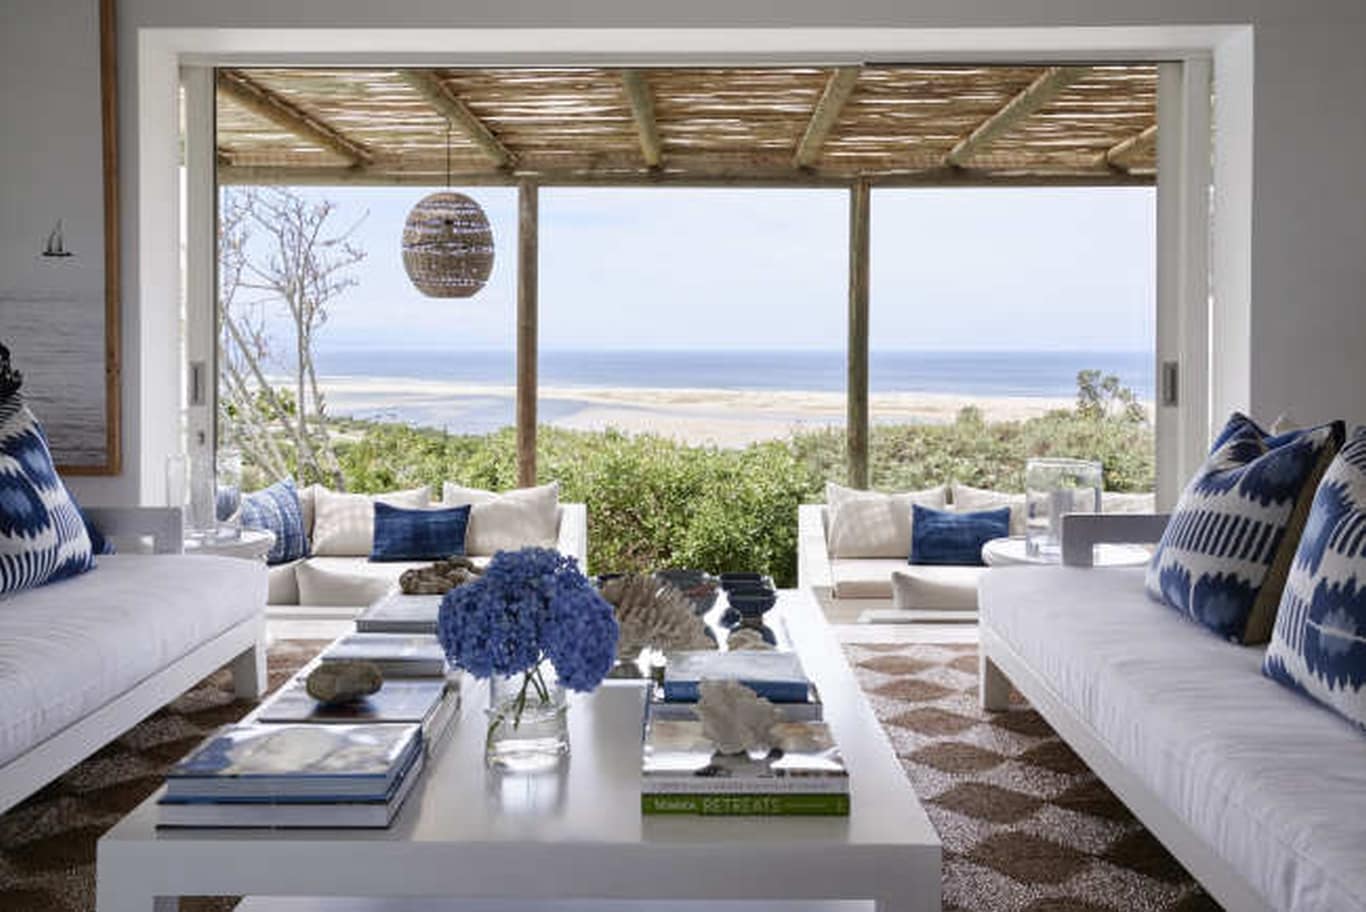 House Yvonne Obrien , Plettenberg Bay, South Africa. Client: The Private House Company. Stylist: Cathy O'Clery. Photographer: Mark Williams.